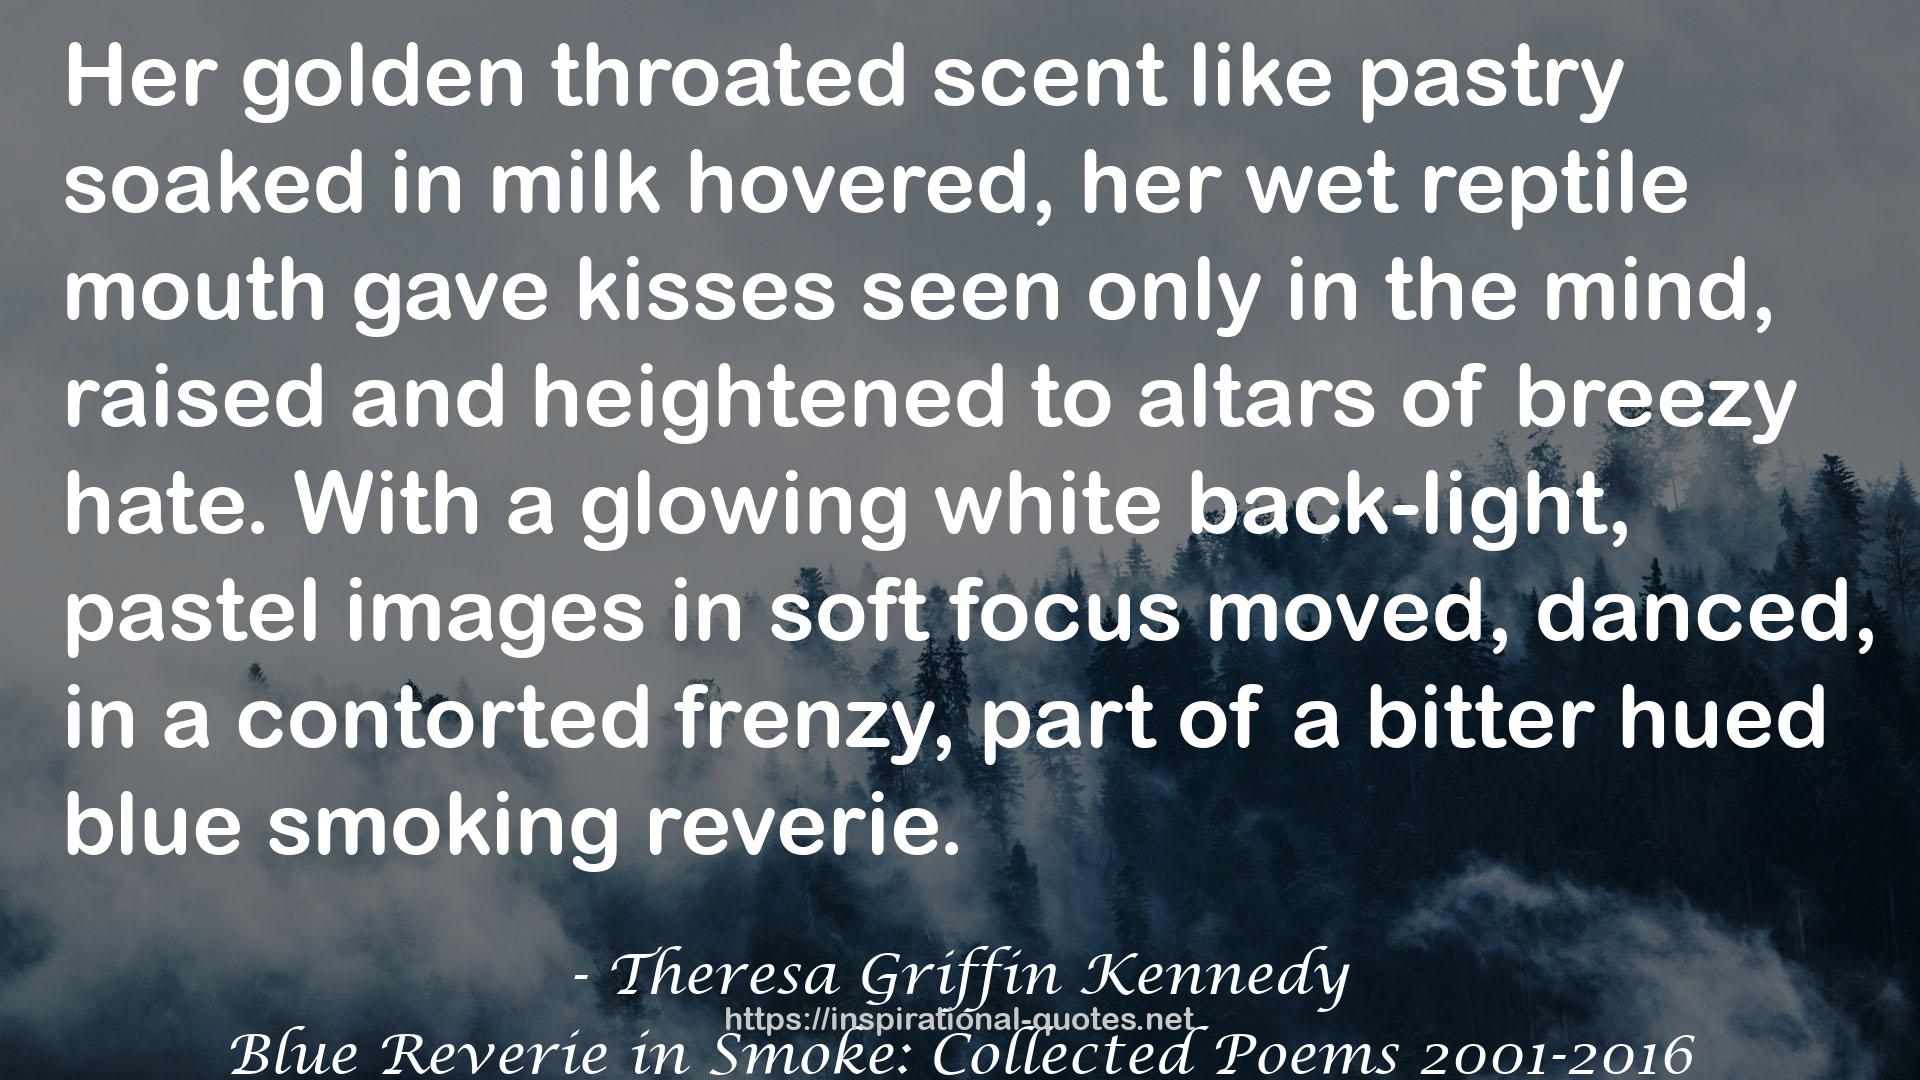 Blue Reverie in Smoke: Collected Poems 2001-2016 QUOTES